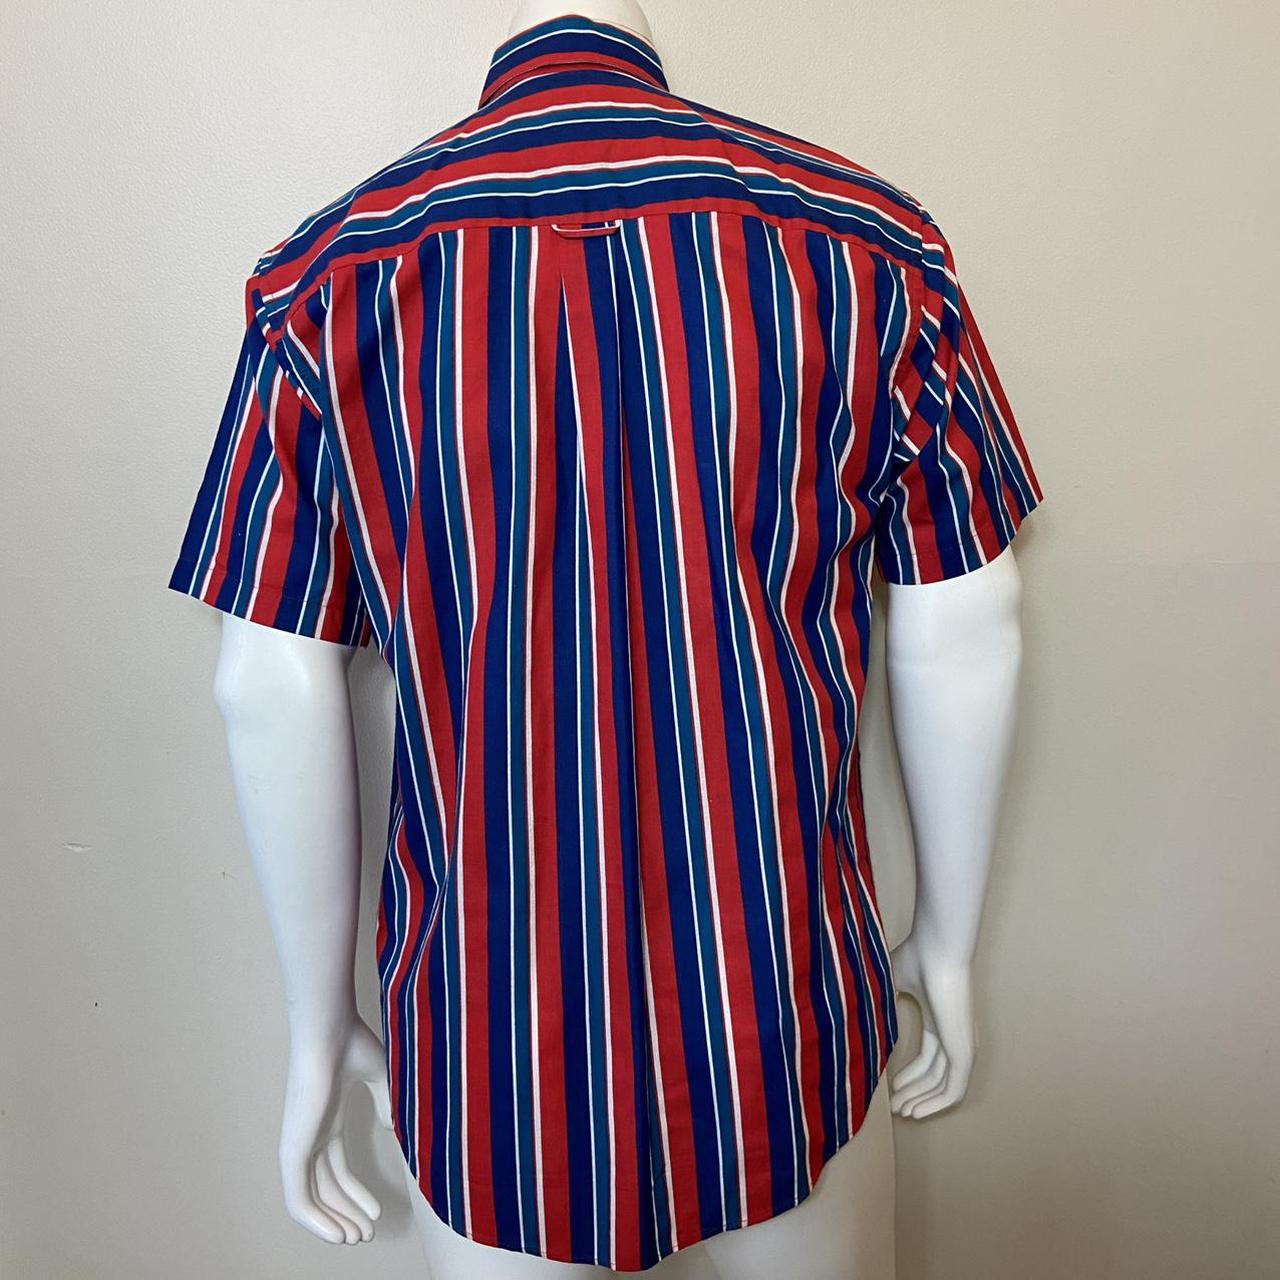 Product Image 3 - VINTAGE 1980s 1990s Striped Shirt